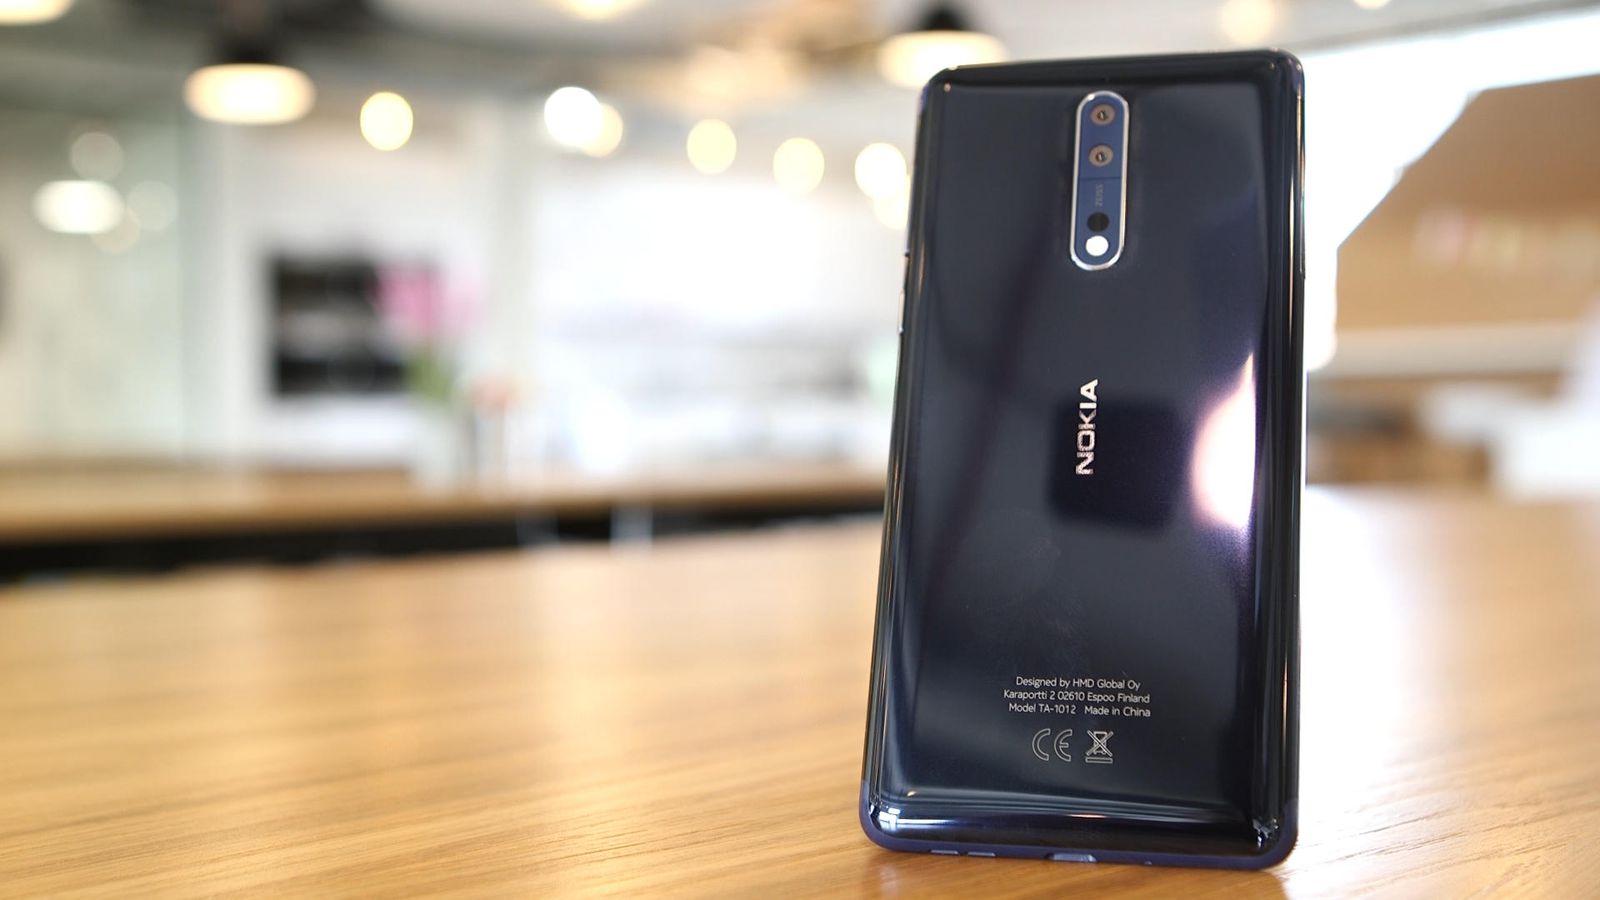 The Nokia 8 was launched in August 2017. (Photo Courtesy: CNET)